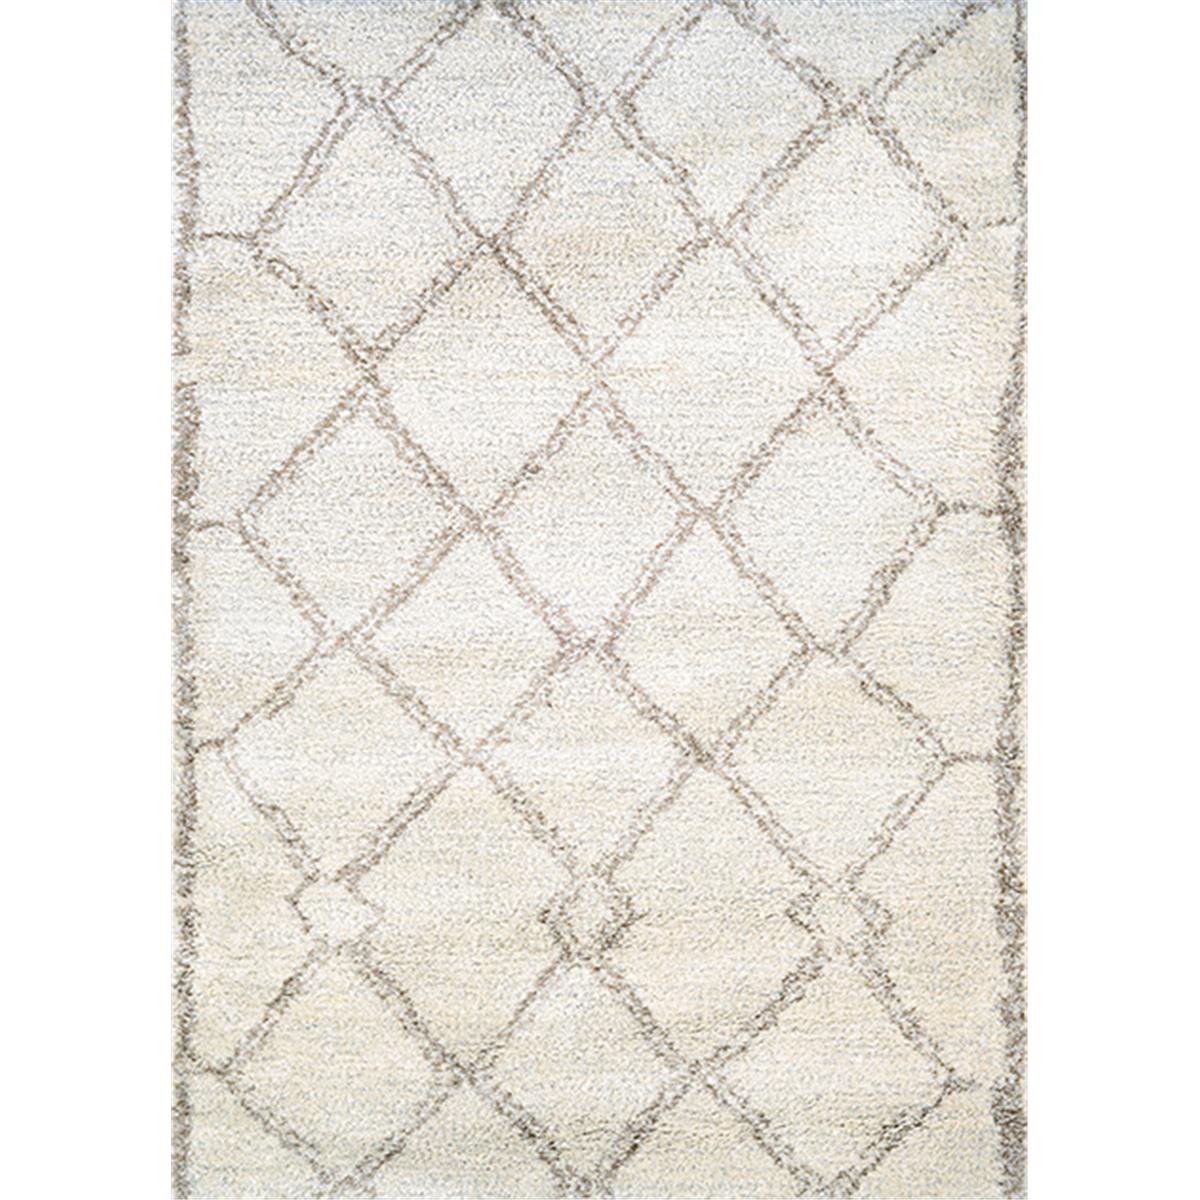 43575100092129t 9 Ft. 2 In. X 12 Ft. 9 In. Bromley Snowflake Rug, Bronze